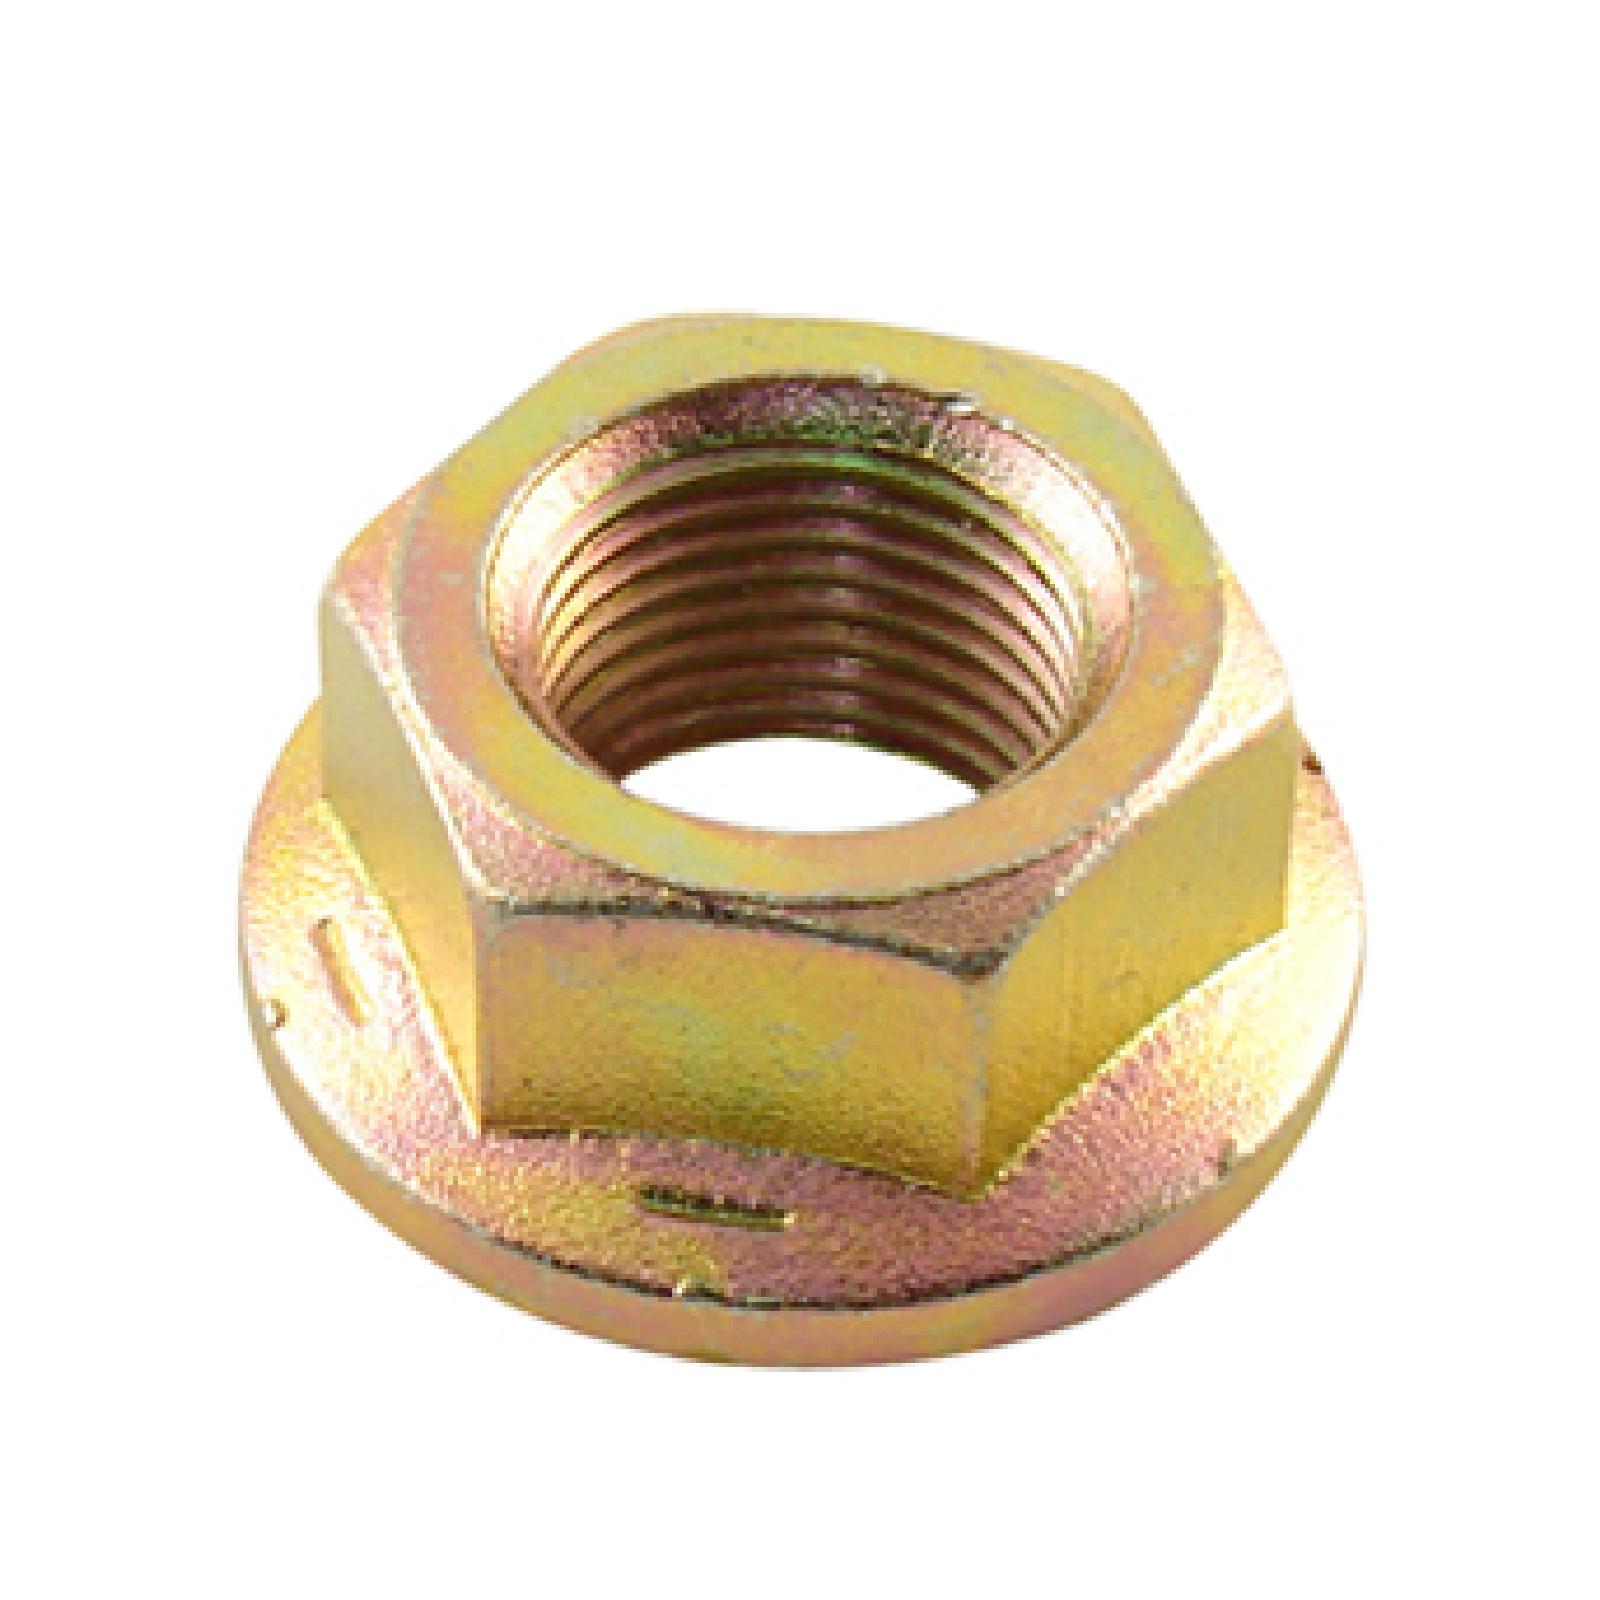 NUT HEX FLANGE 3/4 part# 7123078 by MTD